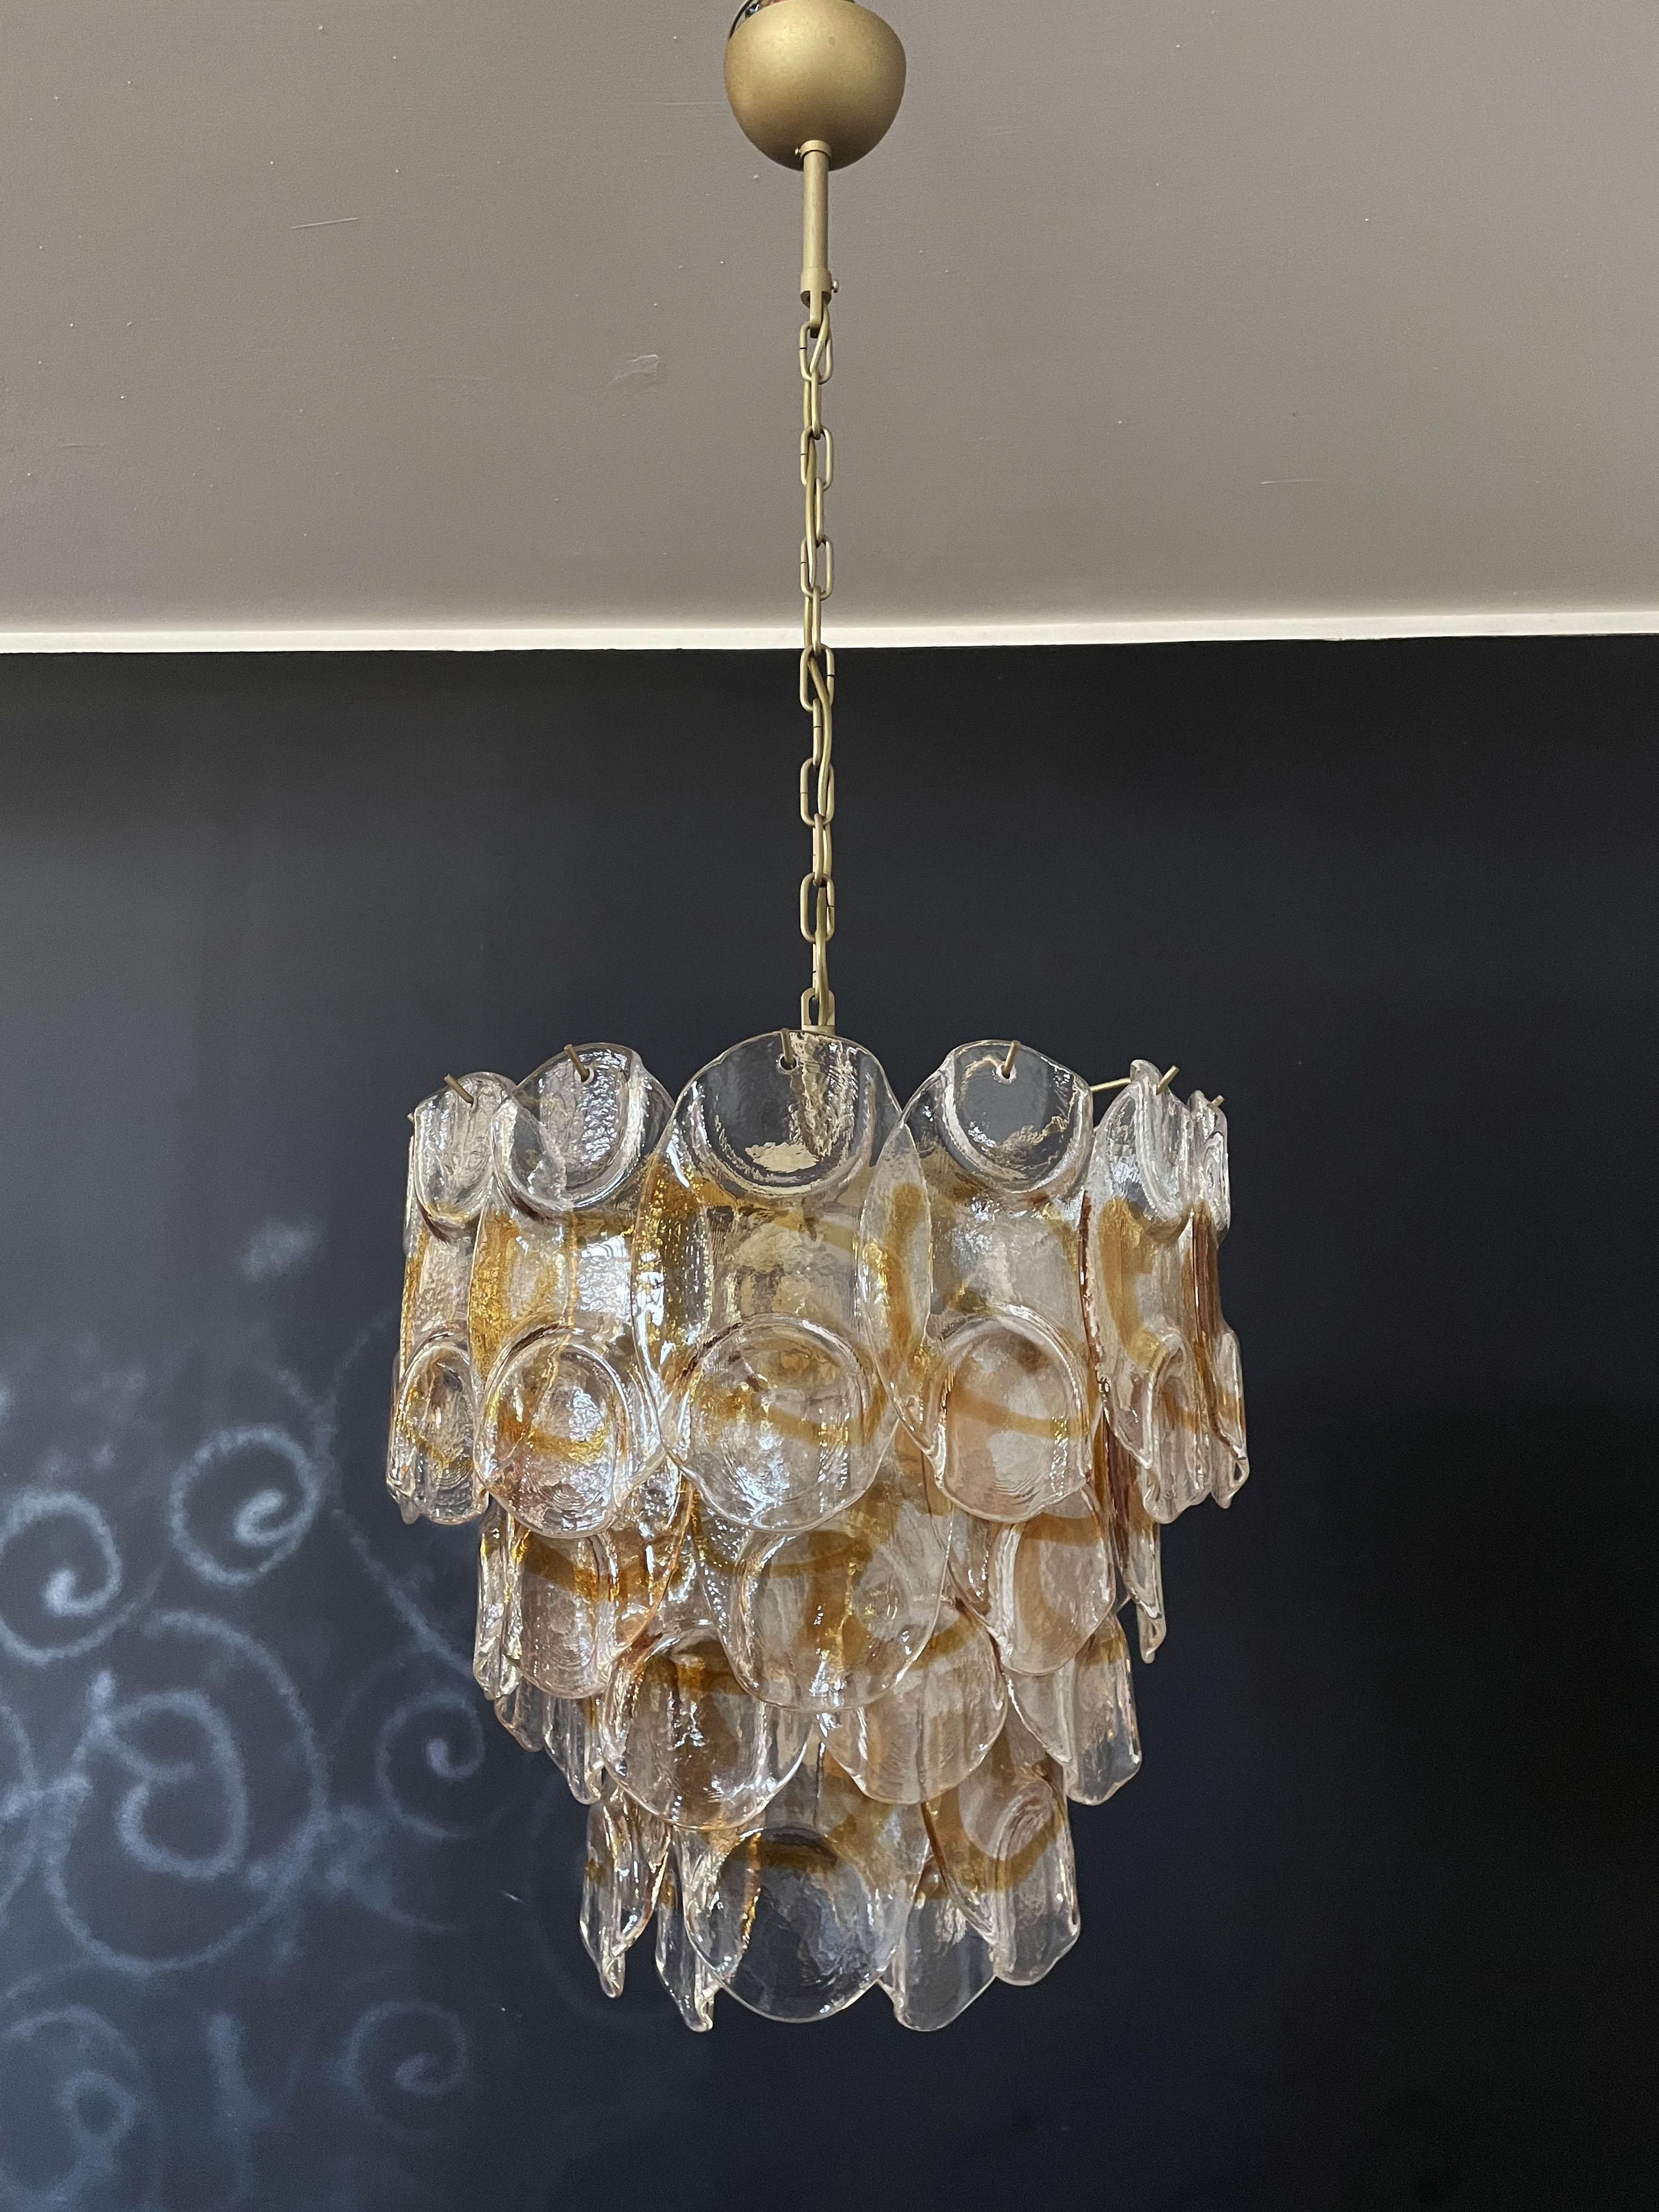 Rare Italian vintage Murano chandelier. The fixture is made up of 41 individual handblown glass elements hanging (transparent and amber) from a gold painted metal frame. Each piece clear with amber centre.
Period: late XX century.
Dimensions: